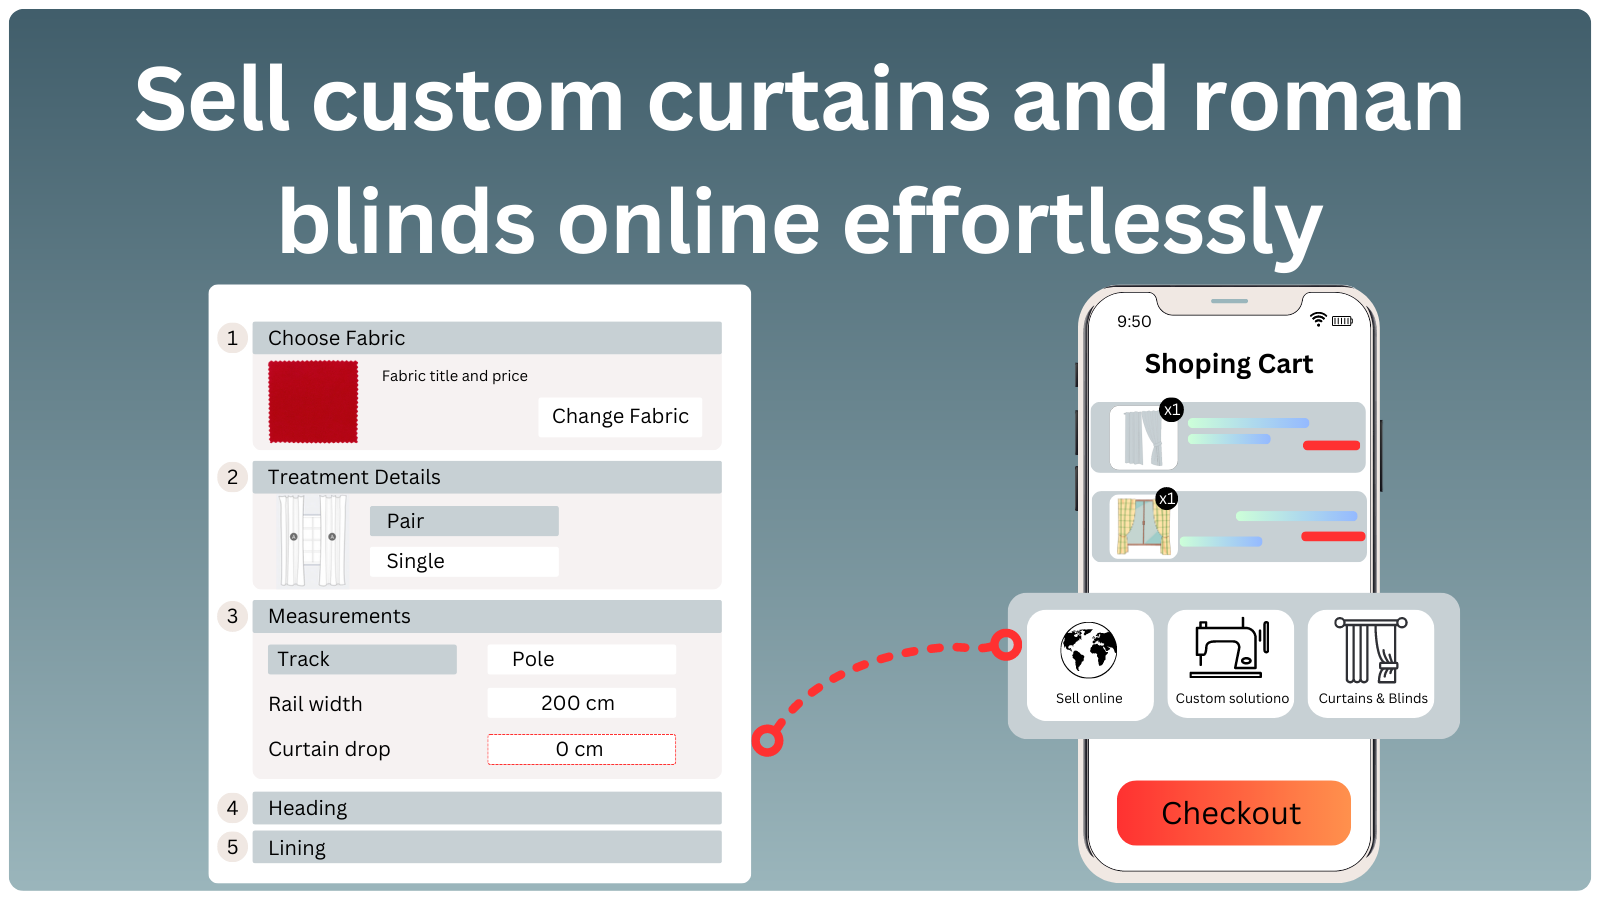 Transform Your Curtain Retail Business with Our Curtains Calculator Plugin Application